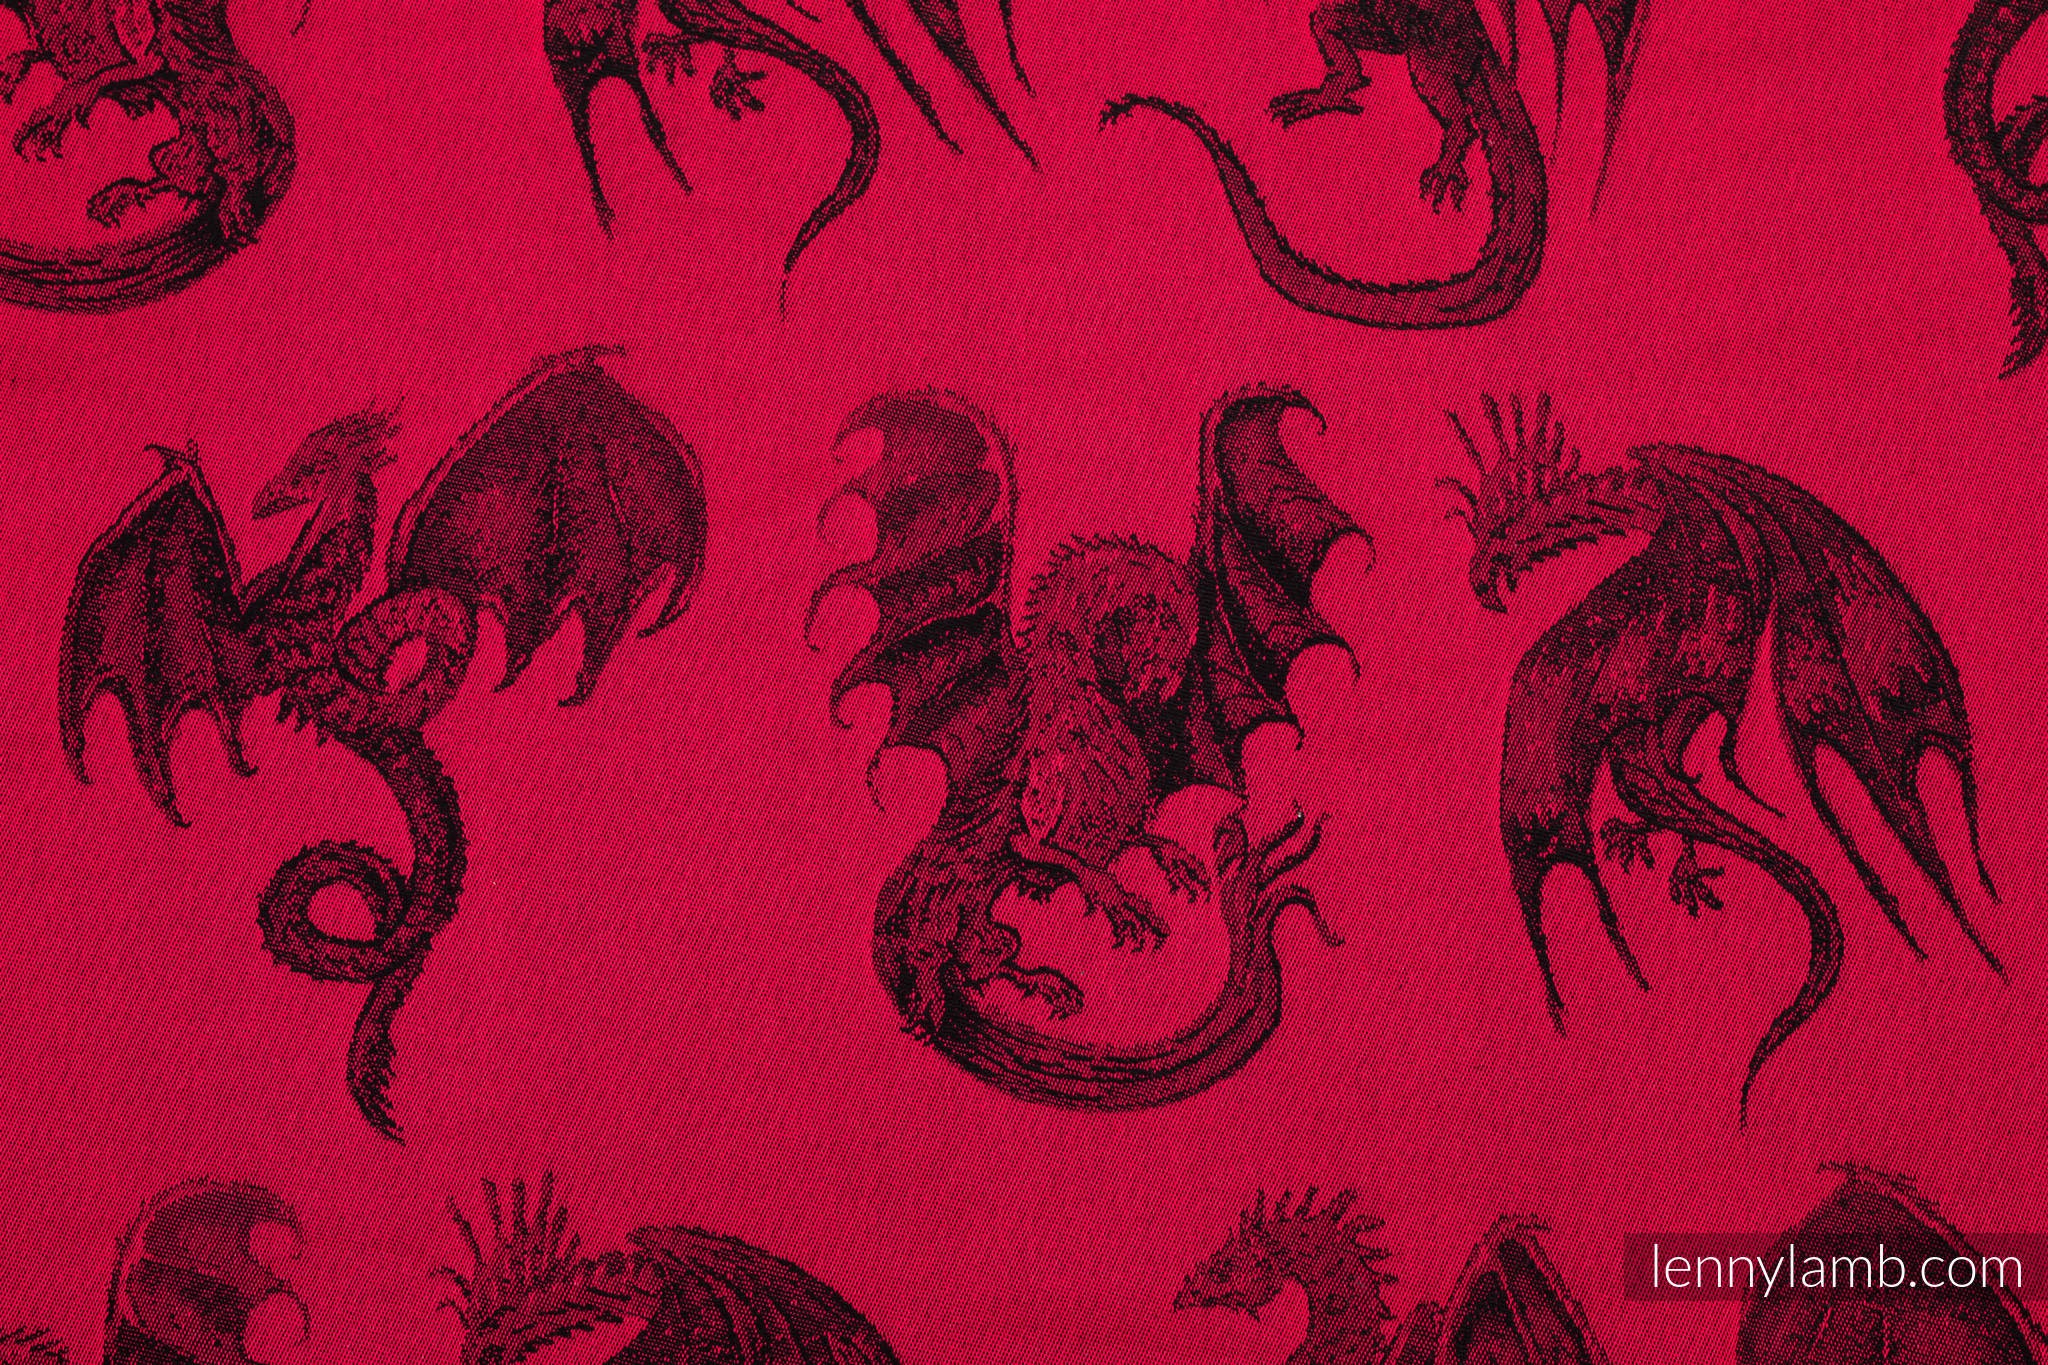 Lenny Lamb Dragon - Fire and Blood Wrap  Image